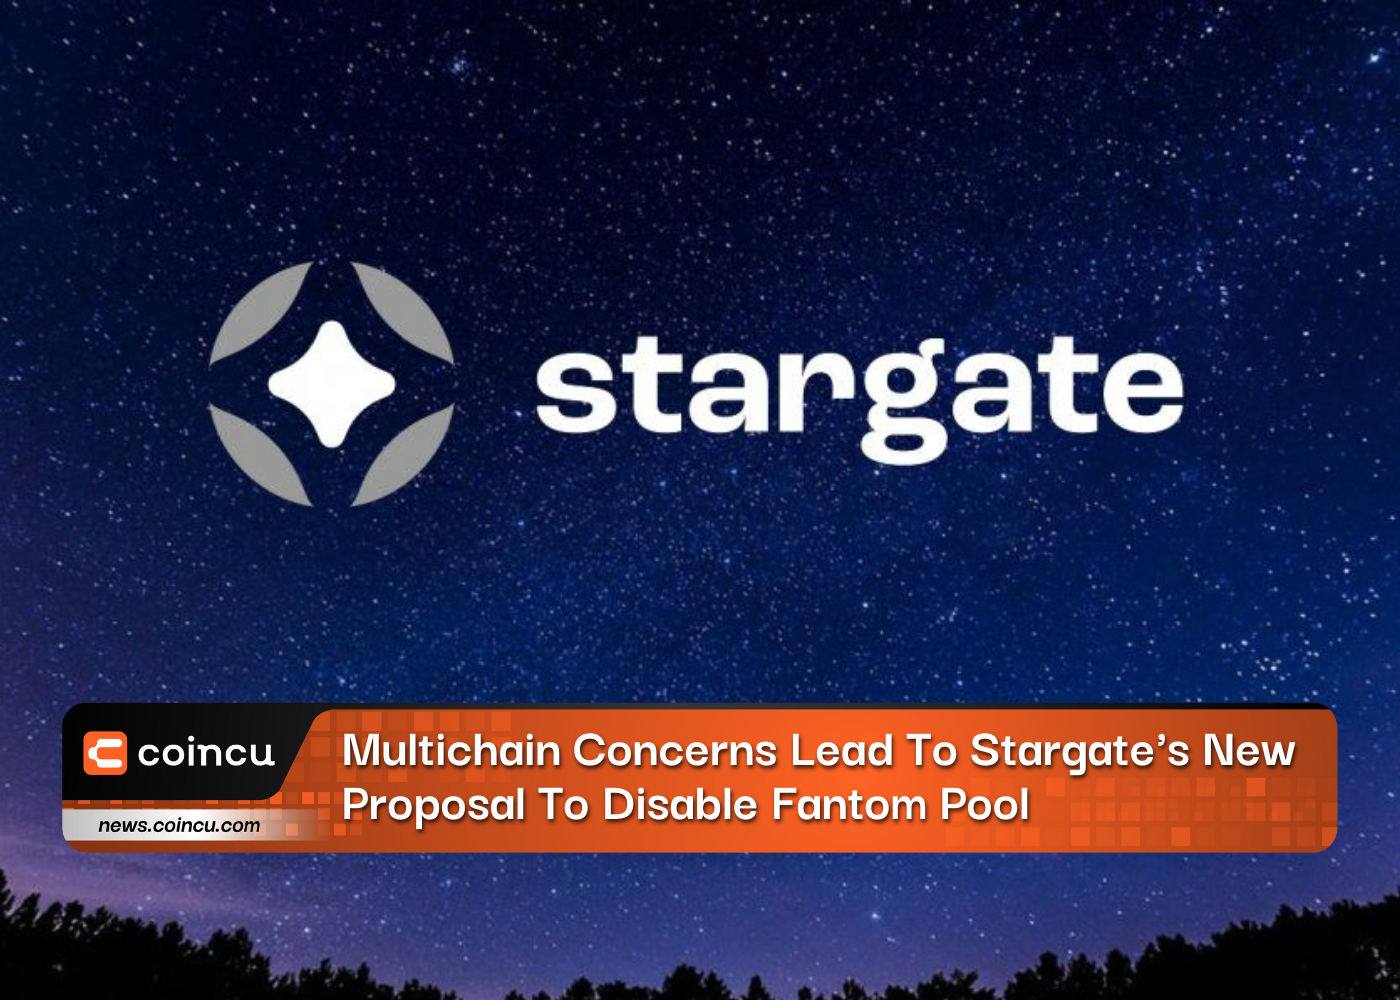 Multichain Concerns Lead To Stargate's New Proposal To Disable Fantom Pool